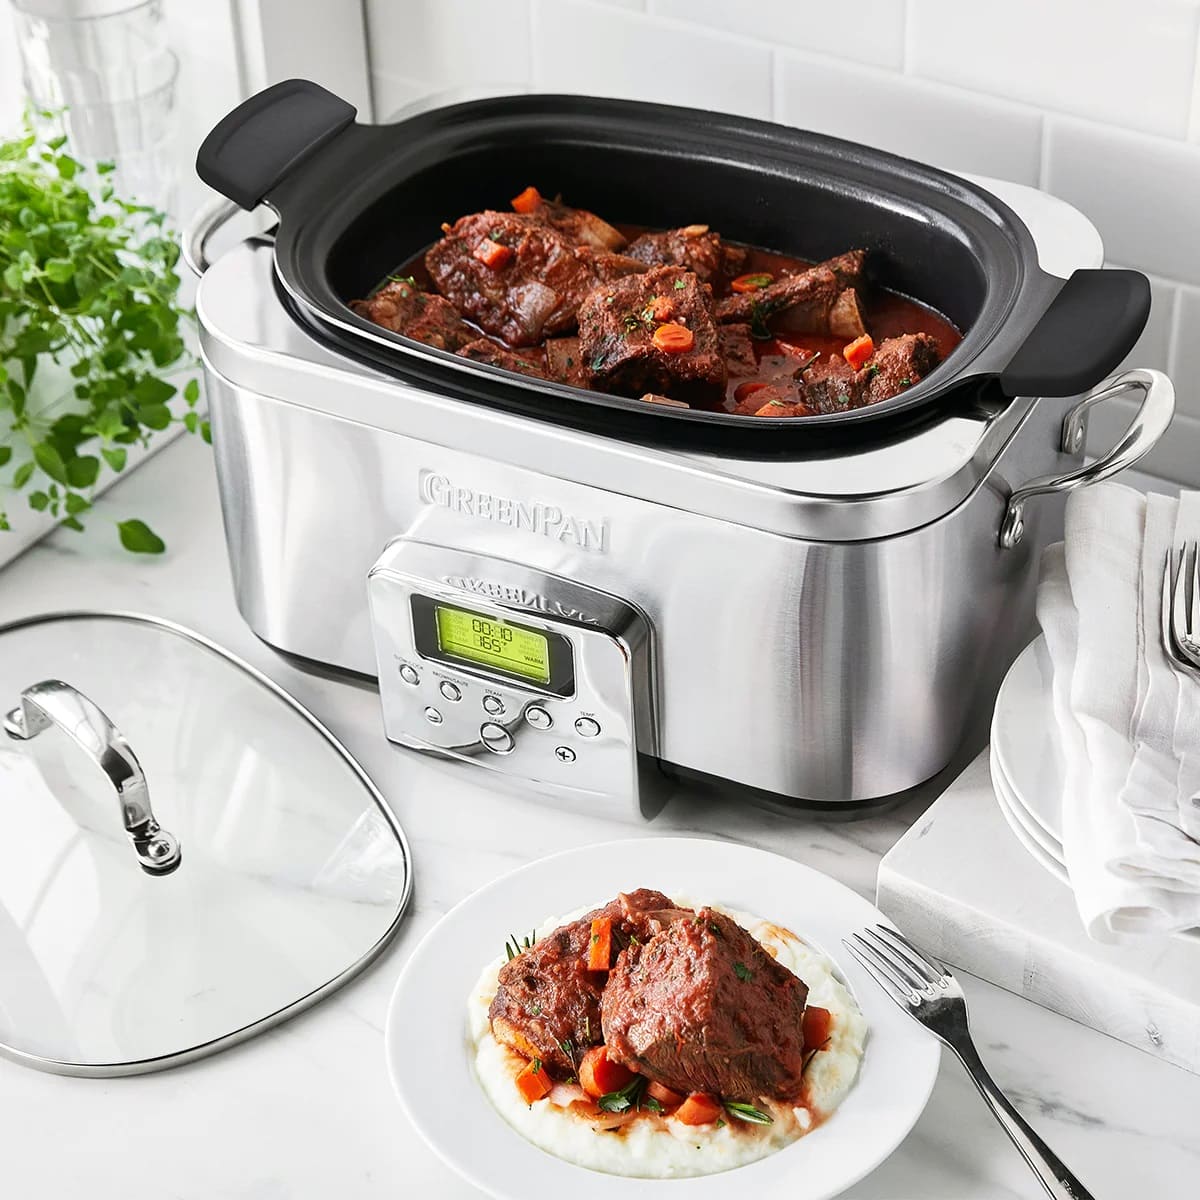 How To Cook Meat In A Slow Cooker